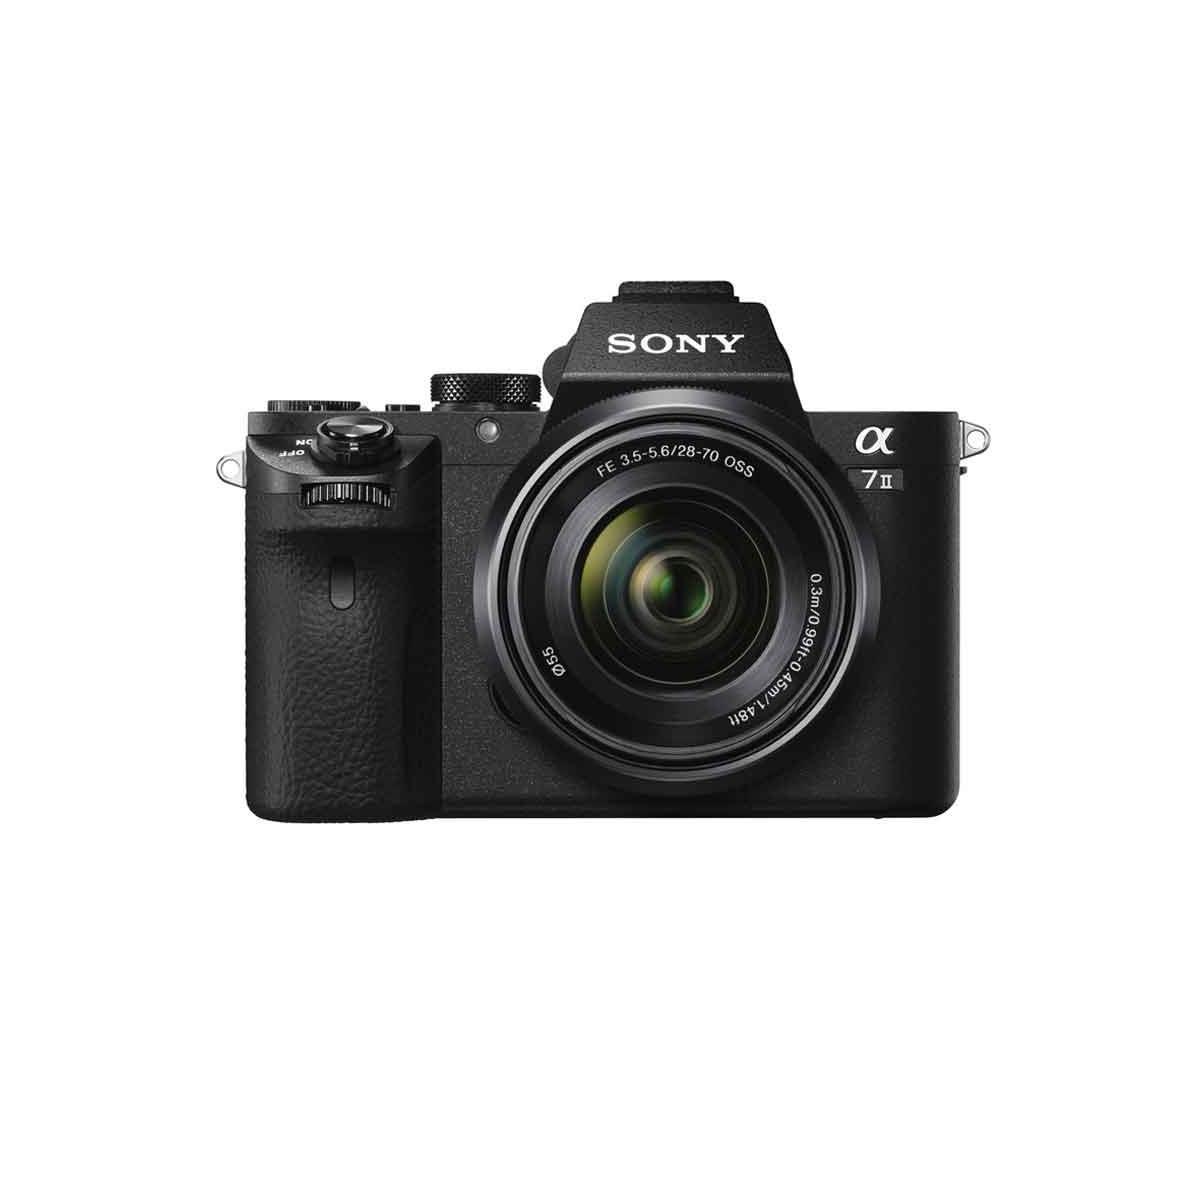 Sony Alpha a7II Mirrorless with 28-70mm OSS Lens